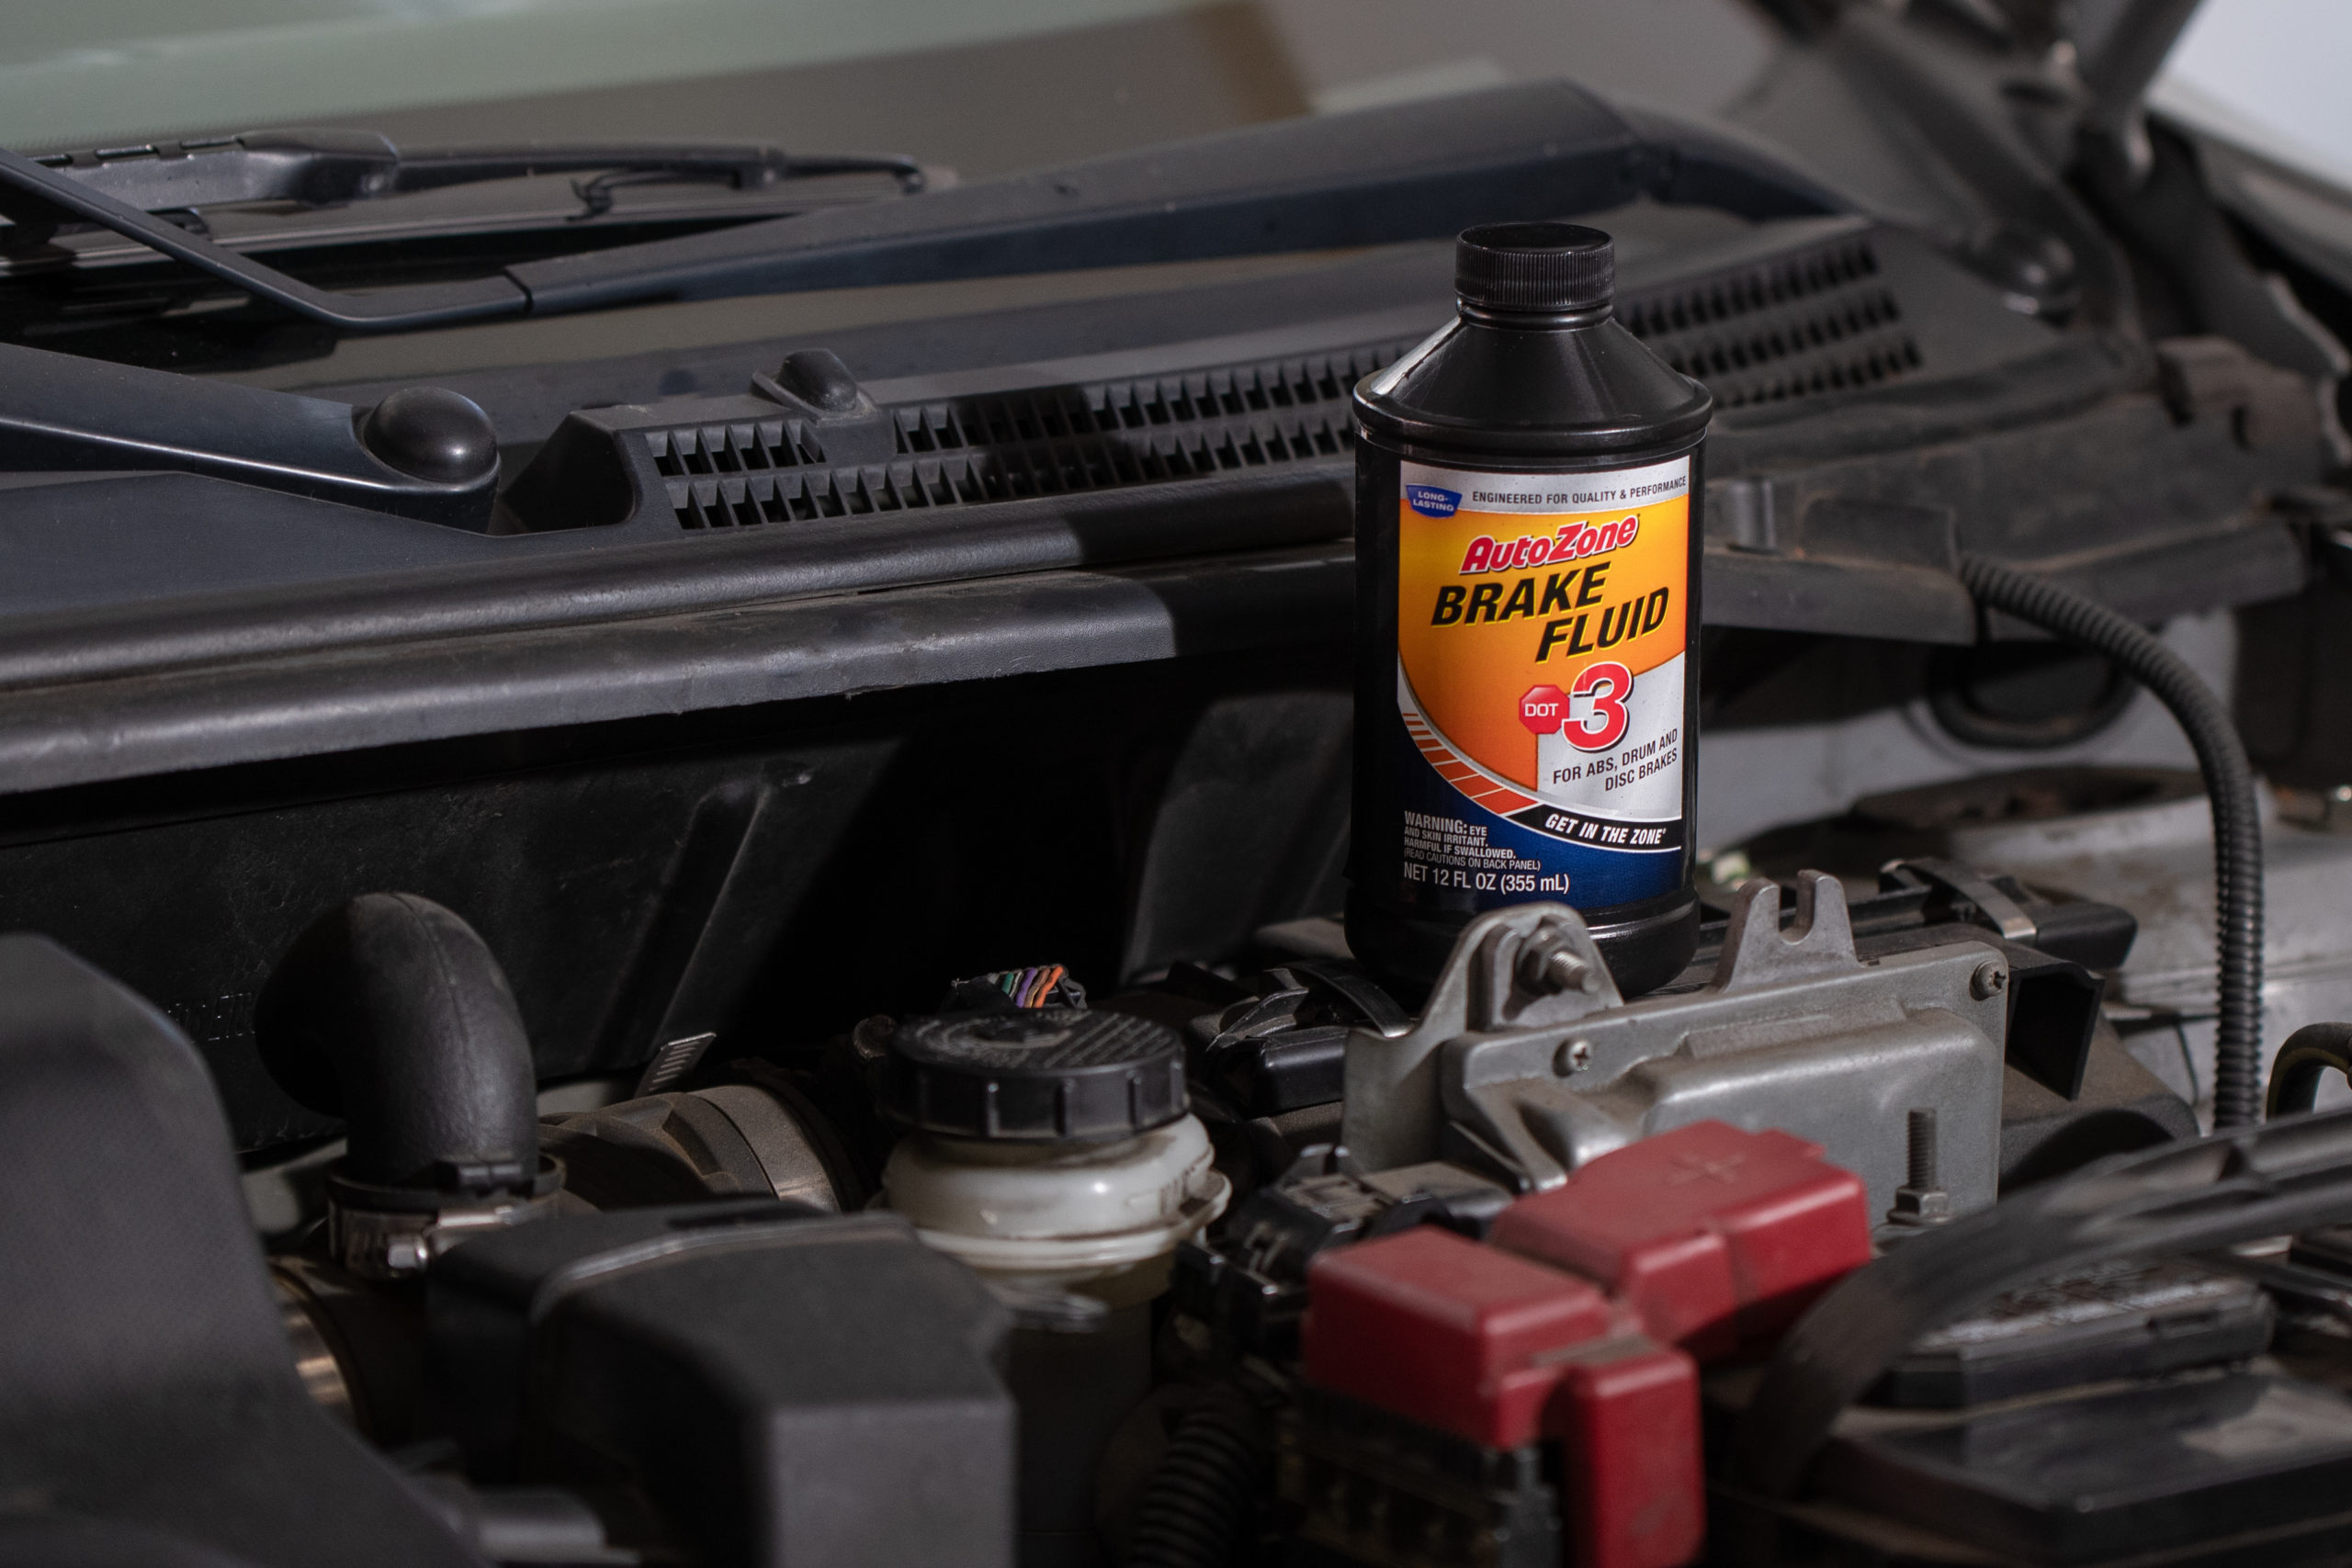 What Is A DOT 4 LV Brake Fluid? (VIDEO)